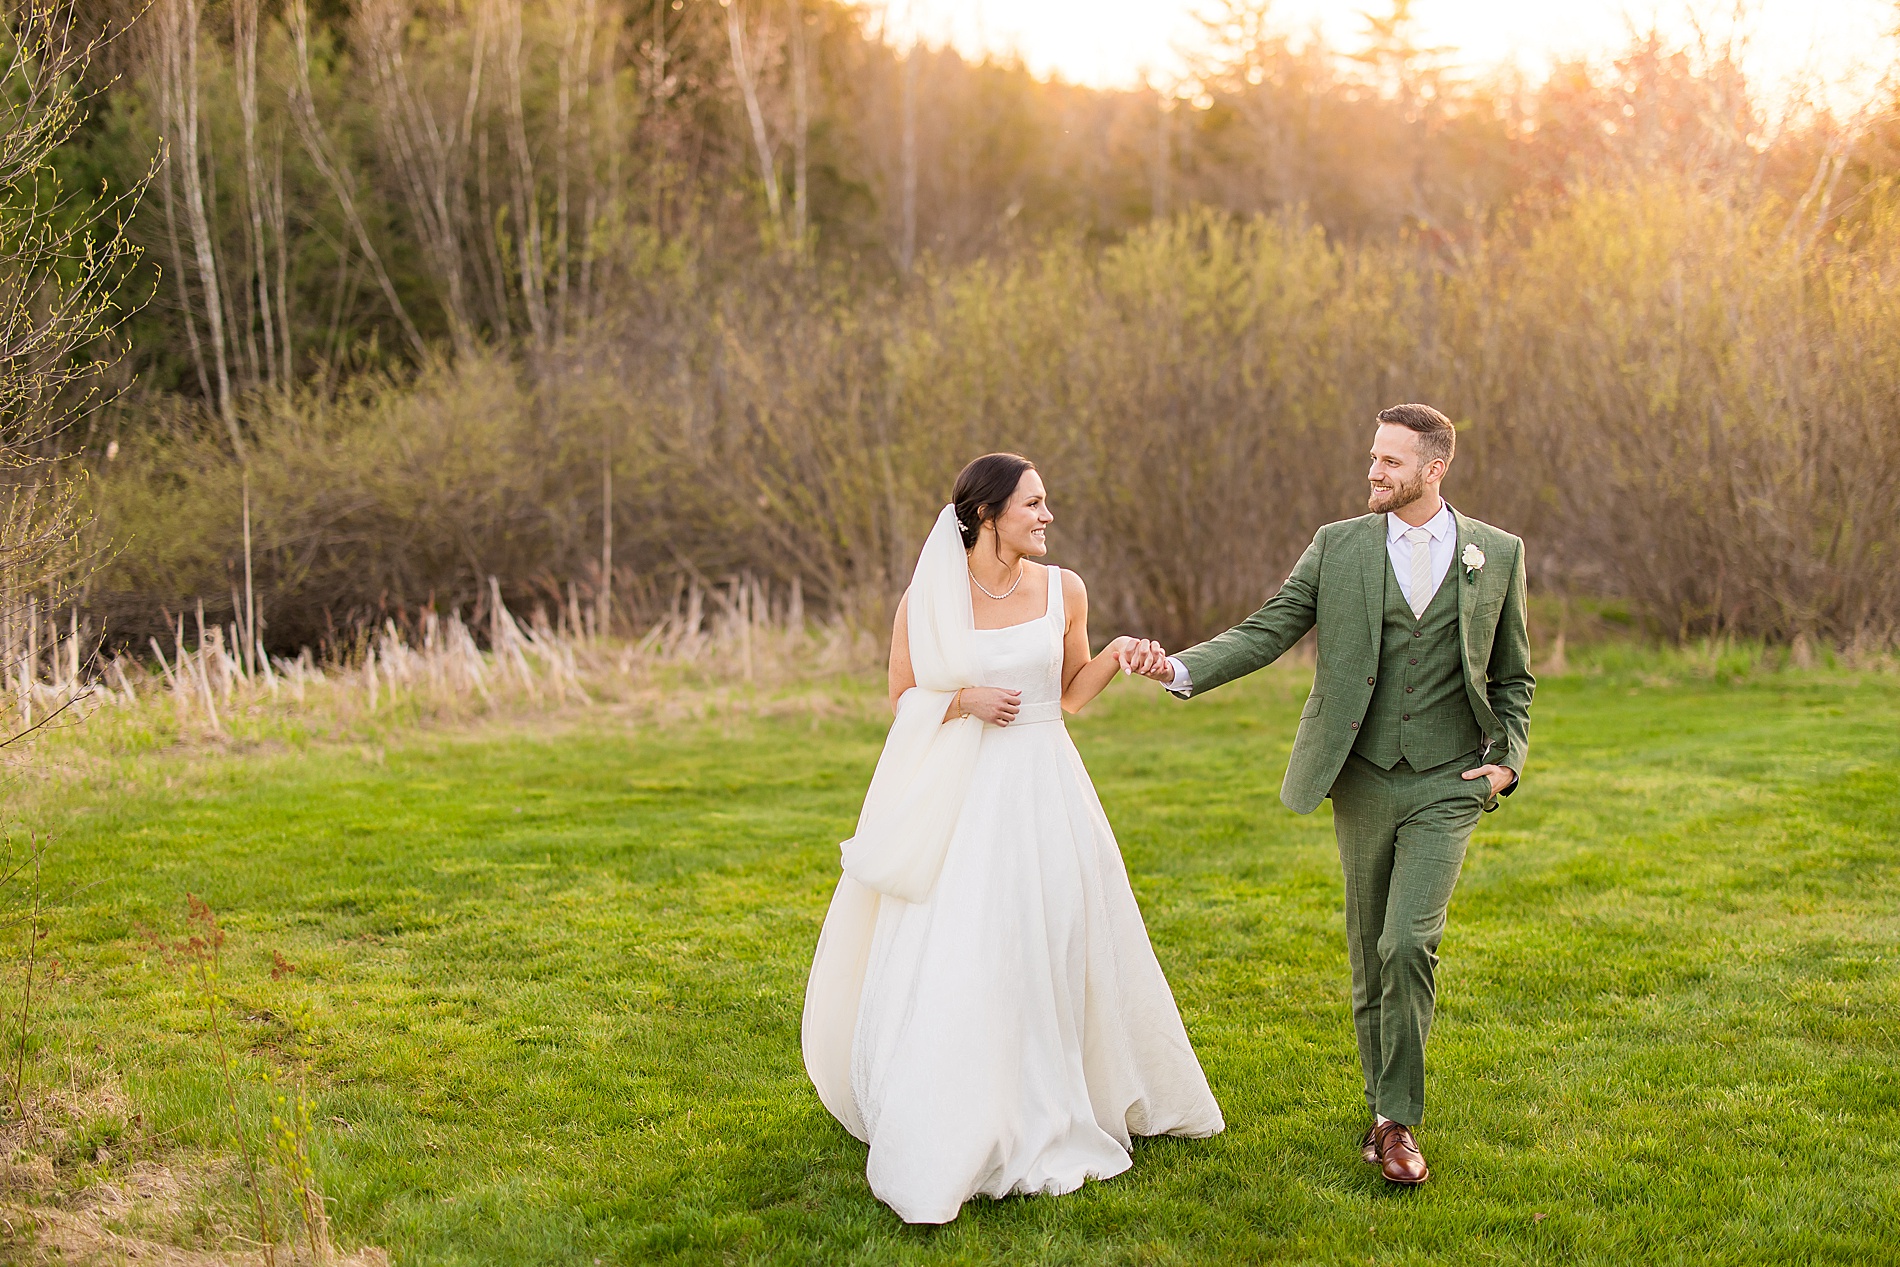 newlyweds hold hands while walking together